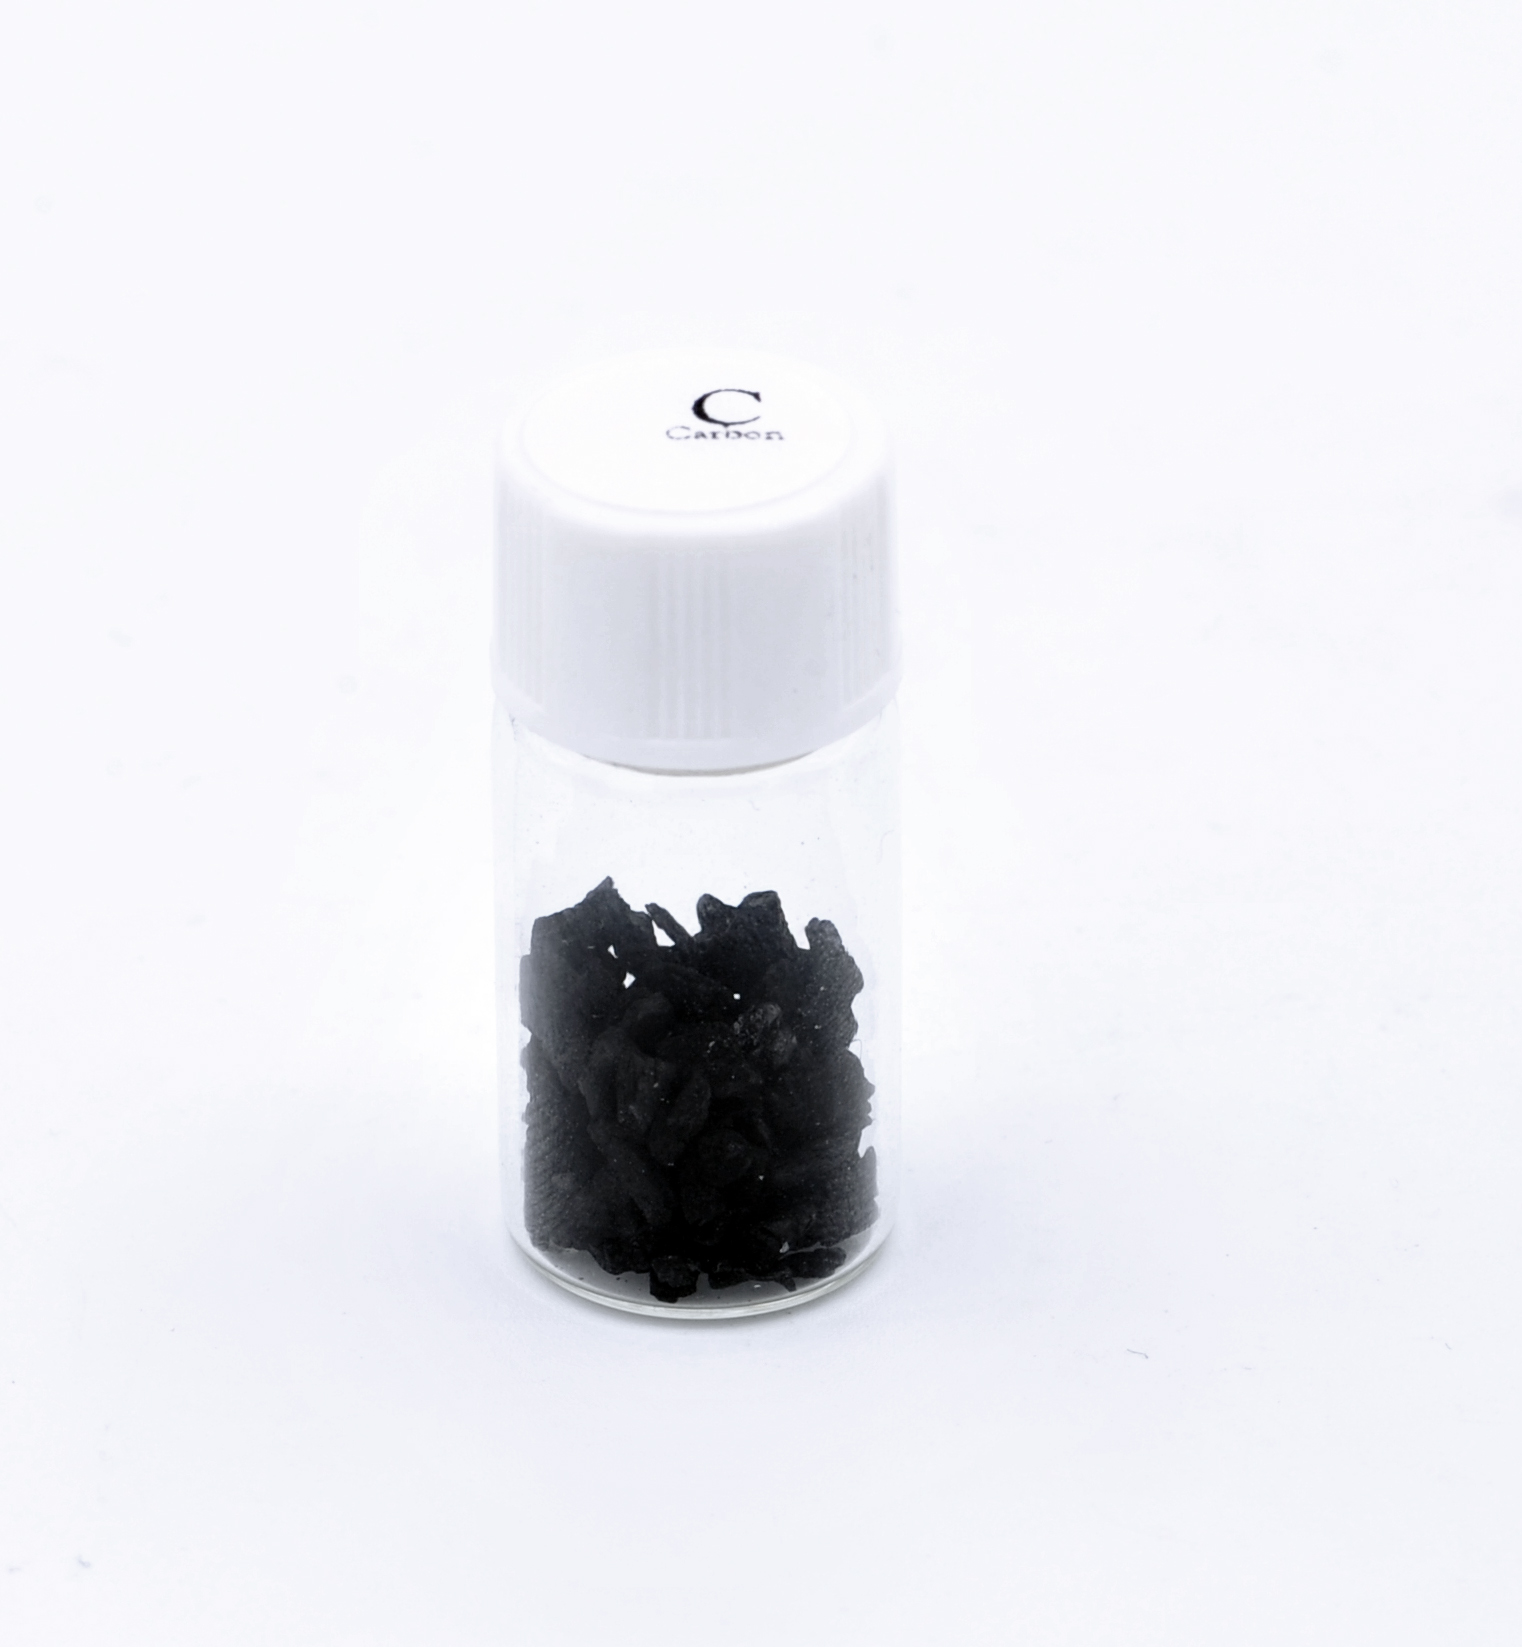 Carbon Element 6 Amorphous Pieces Pure 99.9% 1 Gram in Labeled Glass Vial 